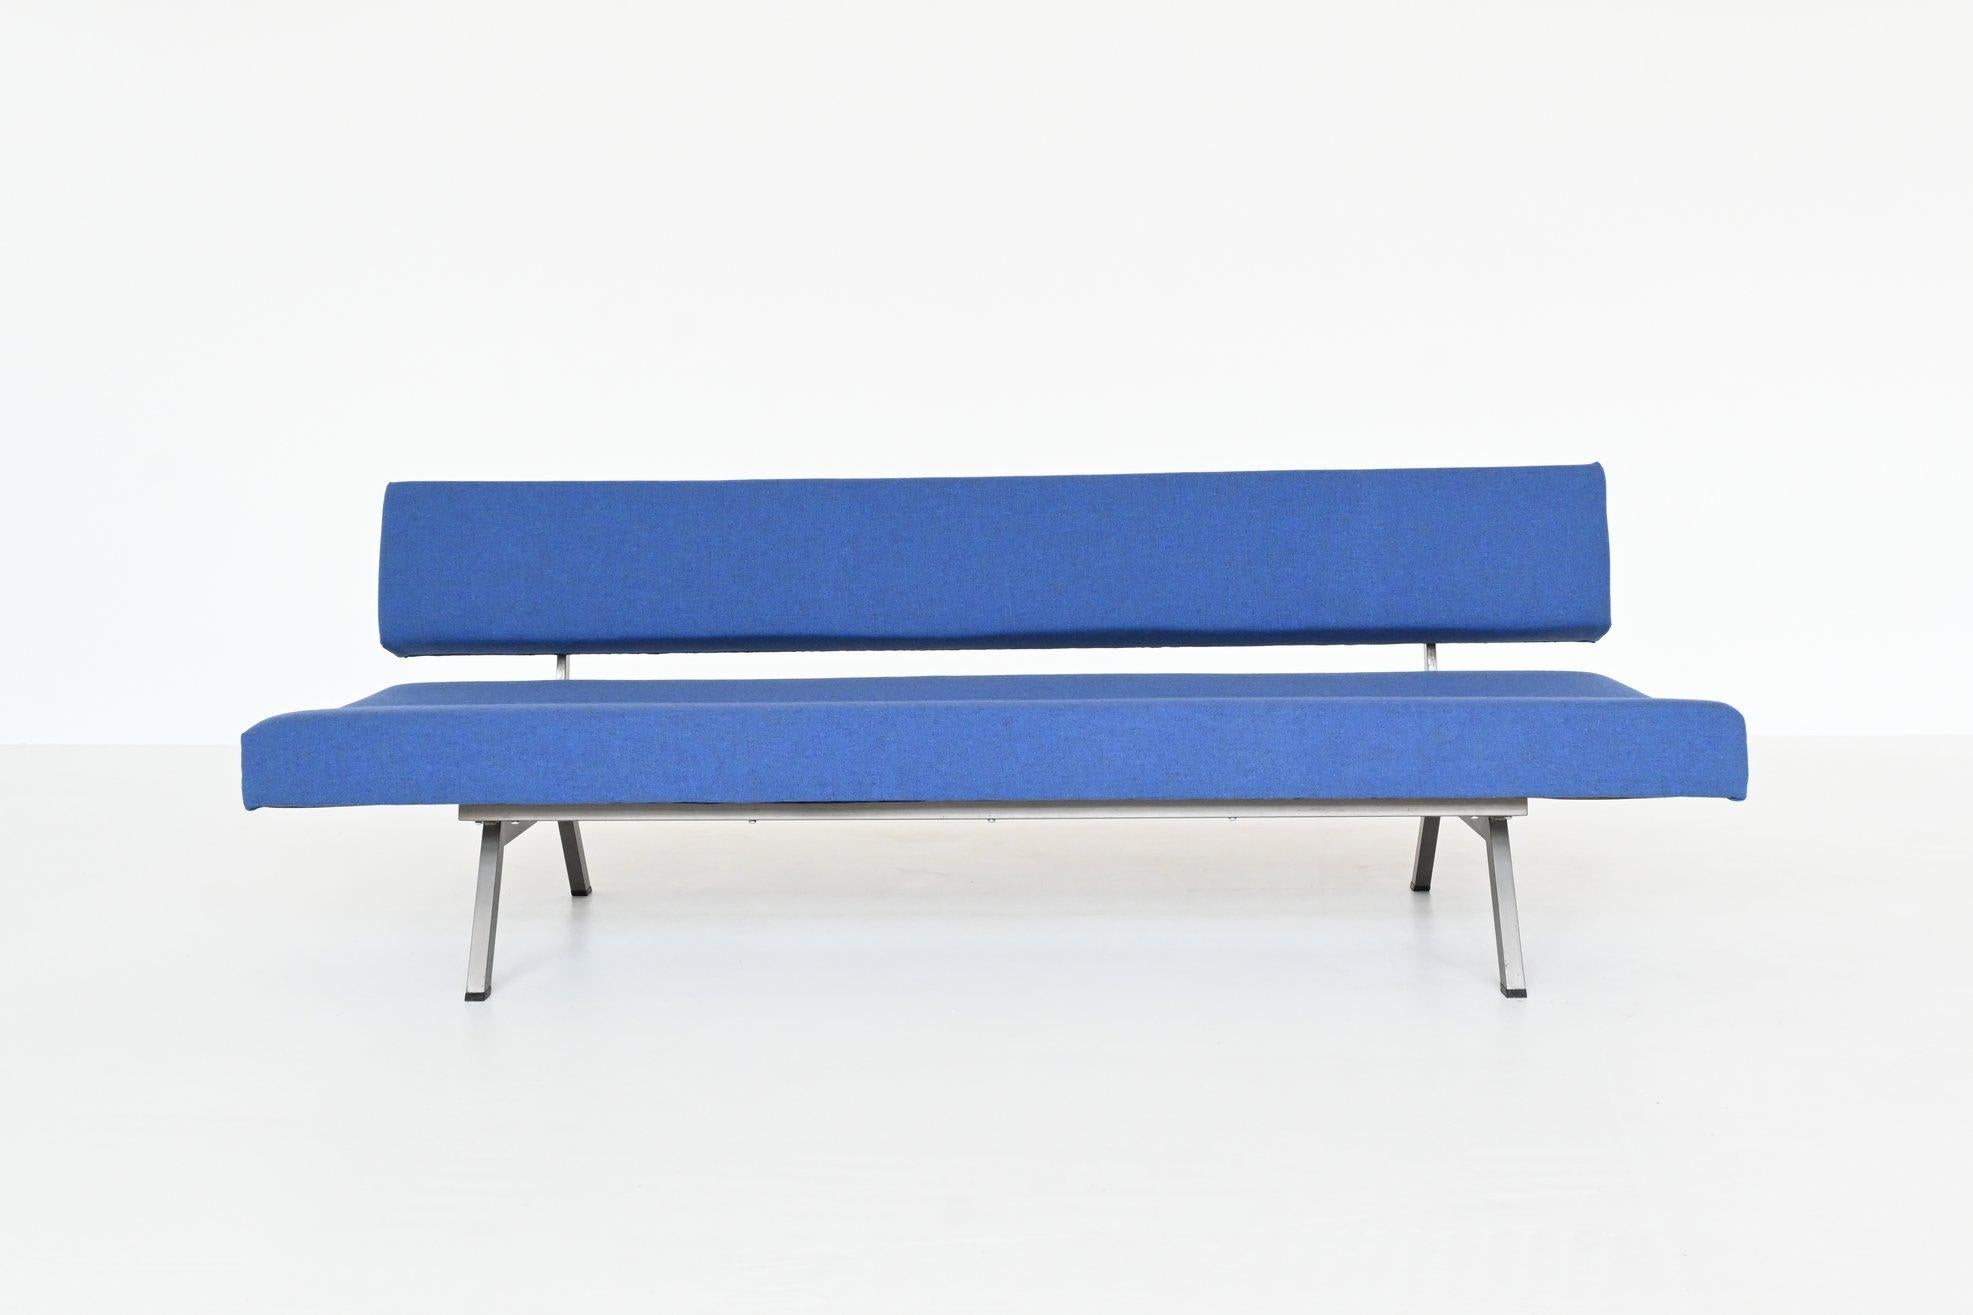 Fantastic shaped and made daybed sofa by unknown manufacturer or designer, The Netherlands 1960. This sofa has a metal frame and blue upholstery by Kvadrat, type Flora-2 786. This fabric is designed by Erik Ole Jorgensen, high quality and beautiful